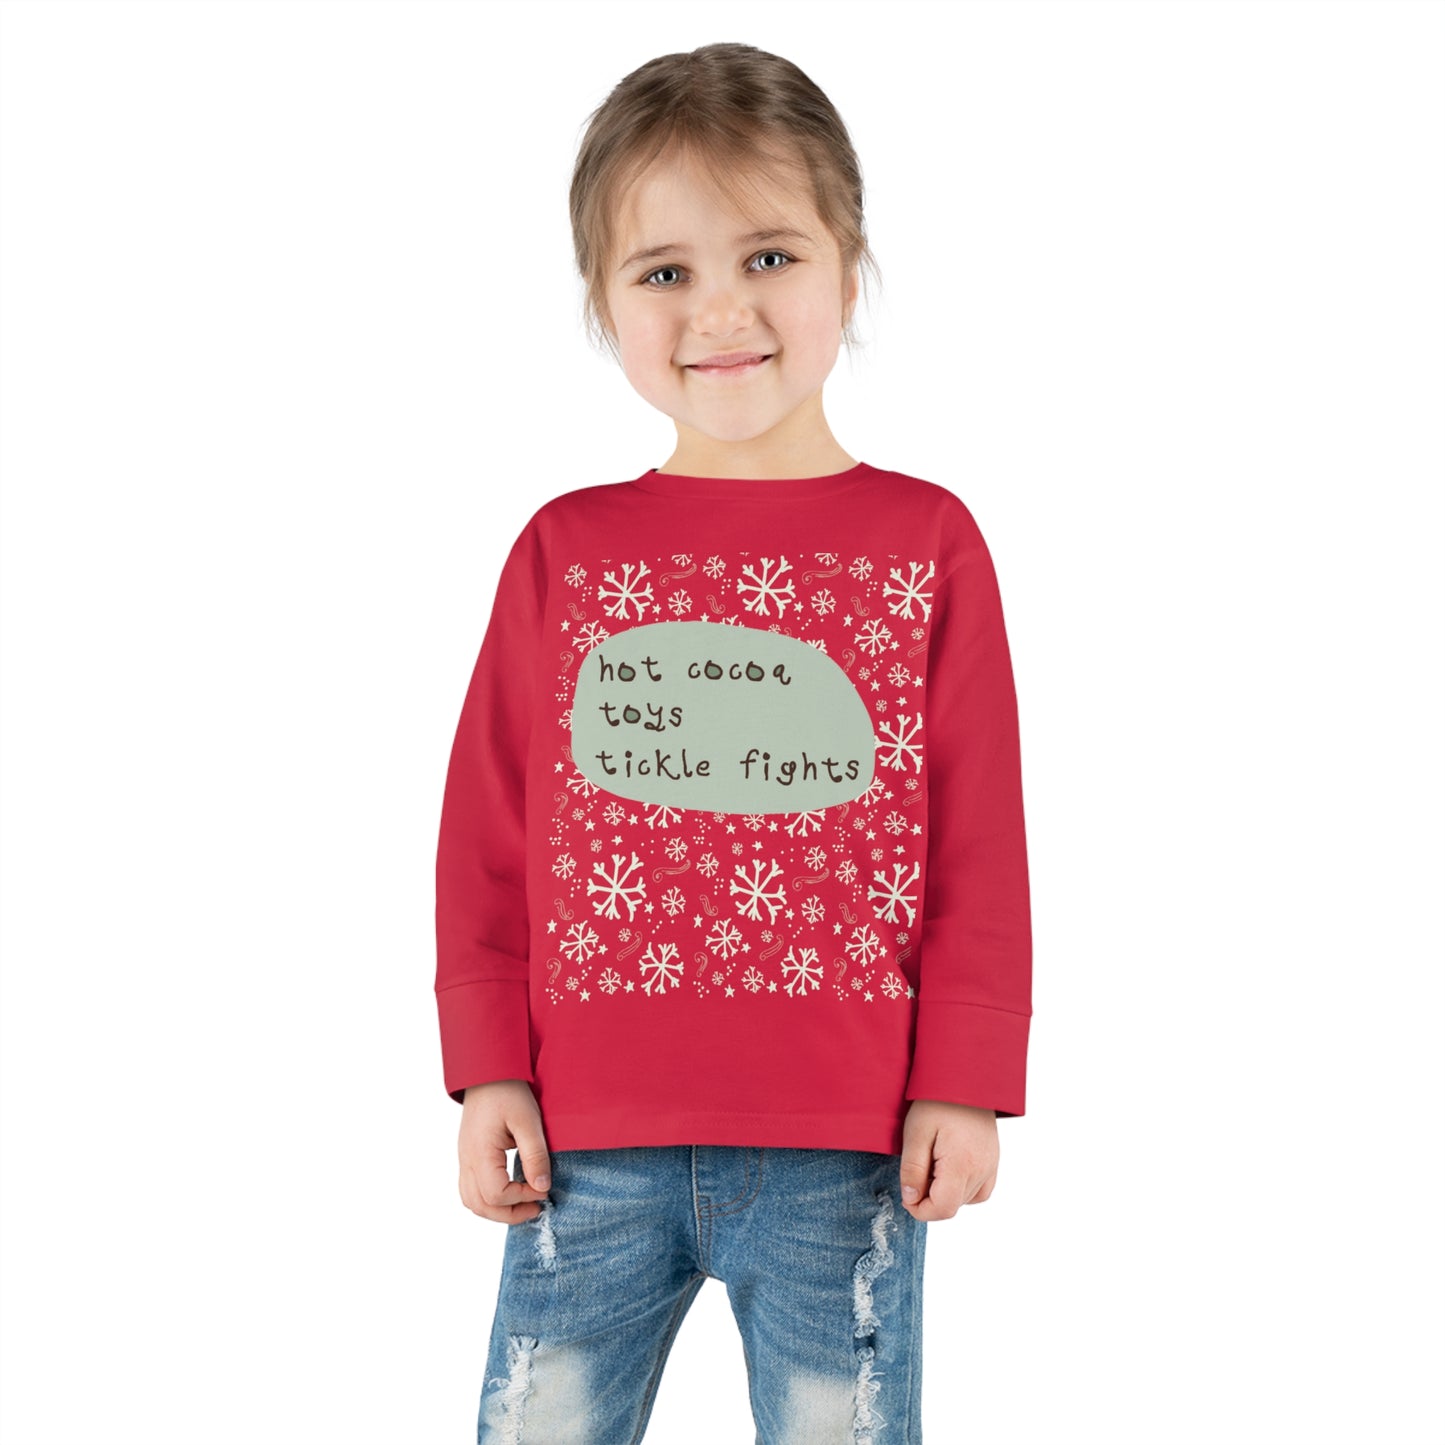 2041 CO TODDLER COTTON HOLIDAY LONG SLEEVE T-SHIRT | CHRISTMAS